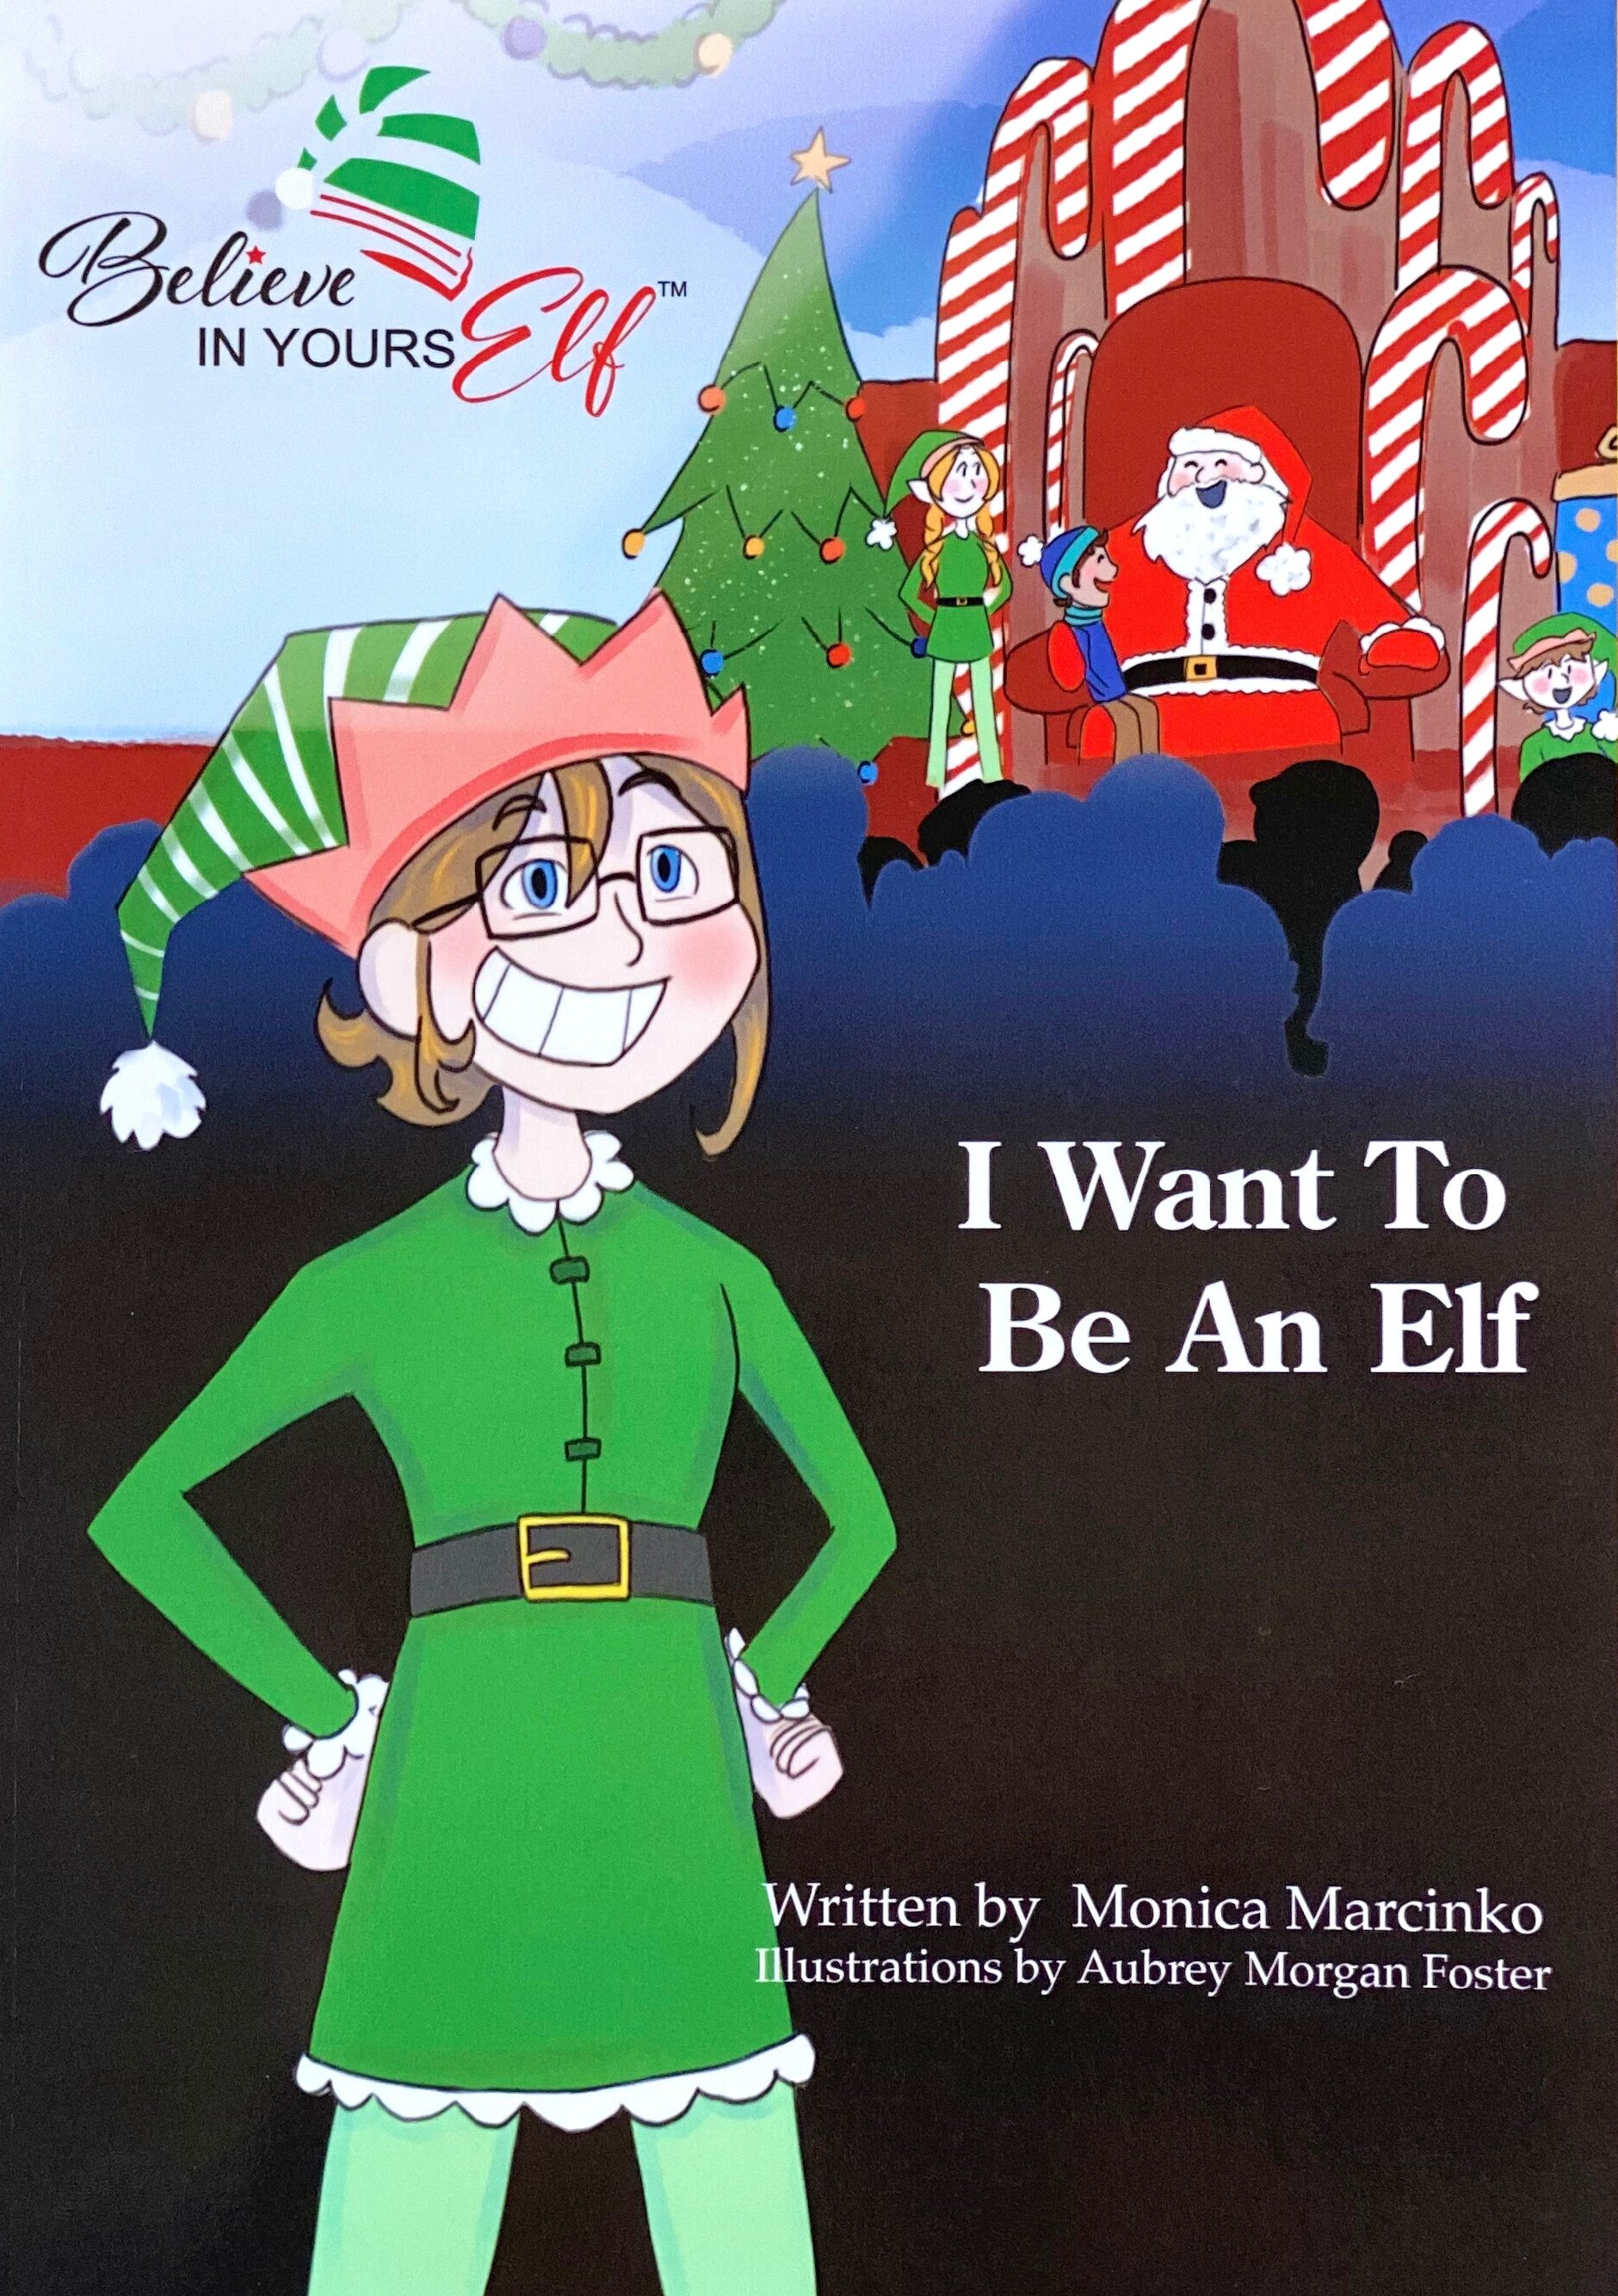 Made in Nevada “I Want To Be An Elf” Children’s Book